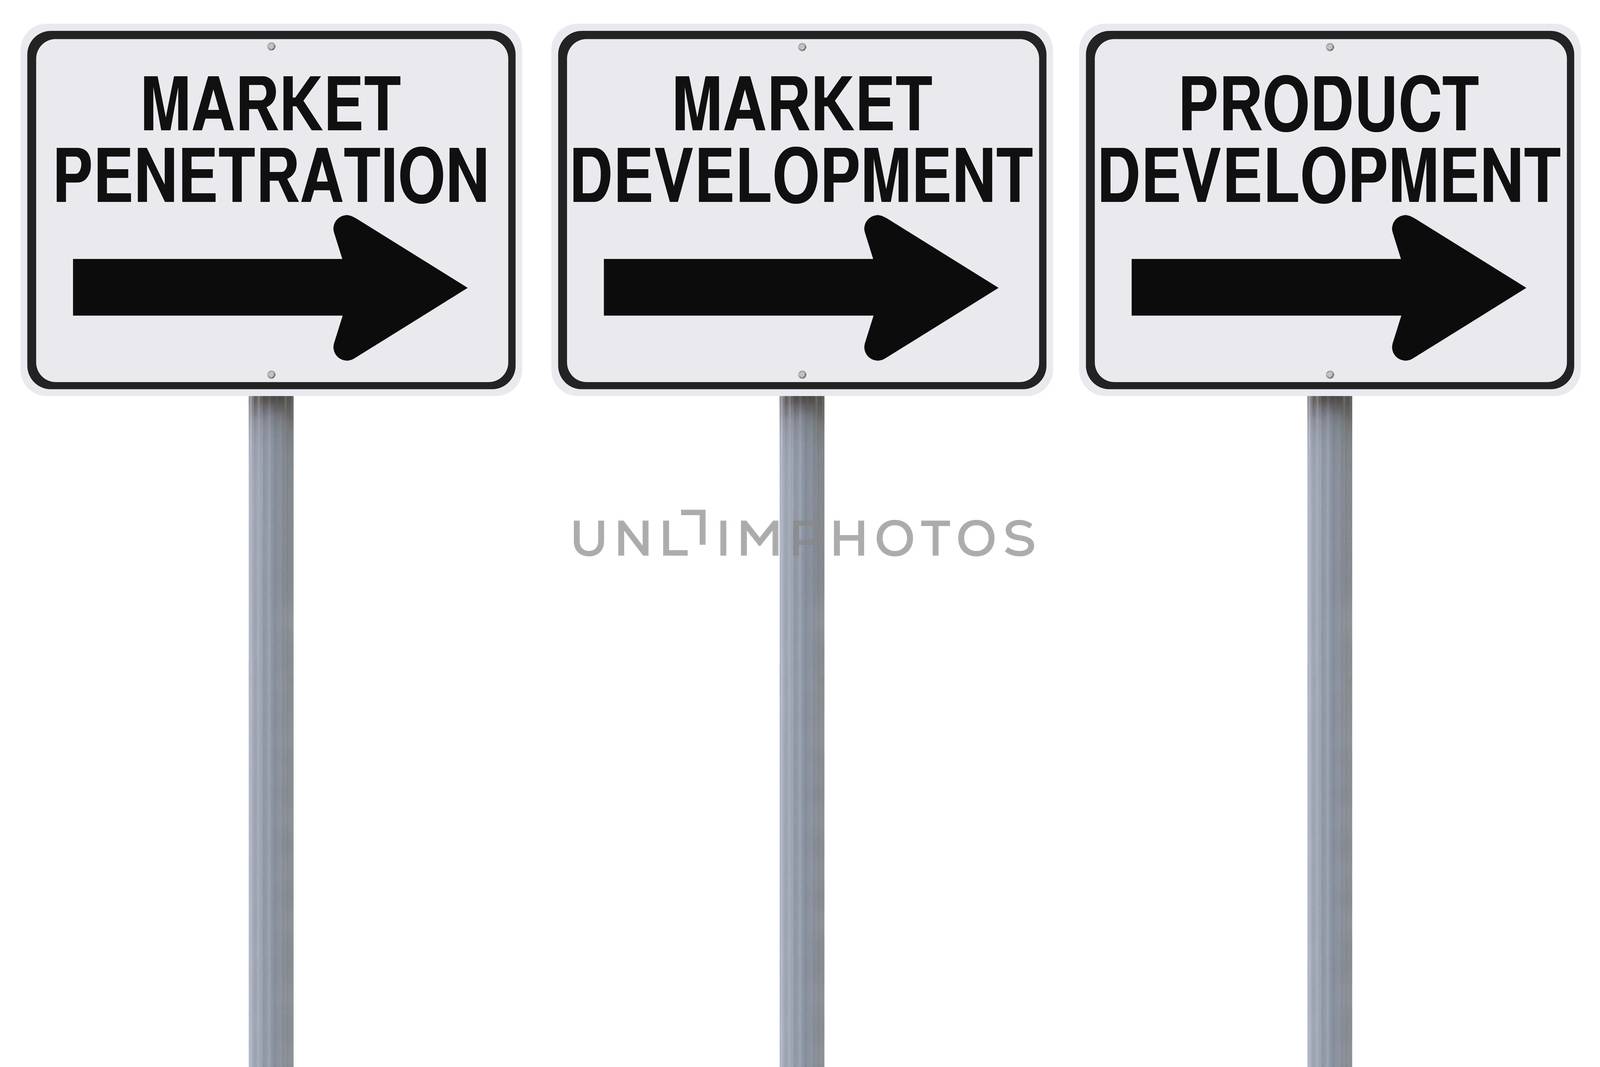 Modified one way street signs on business strategy options (isolated on white)